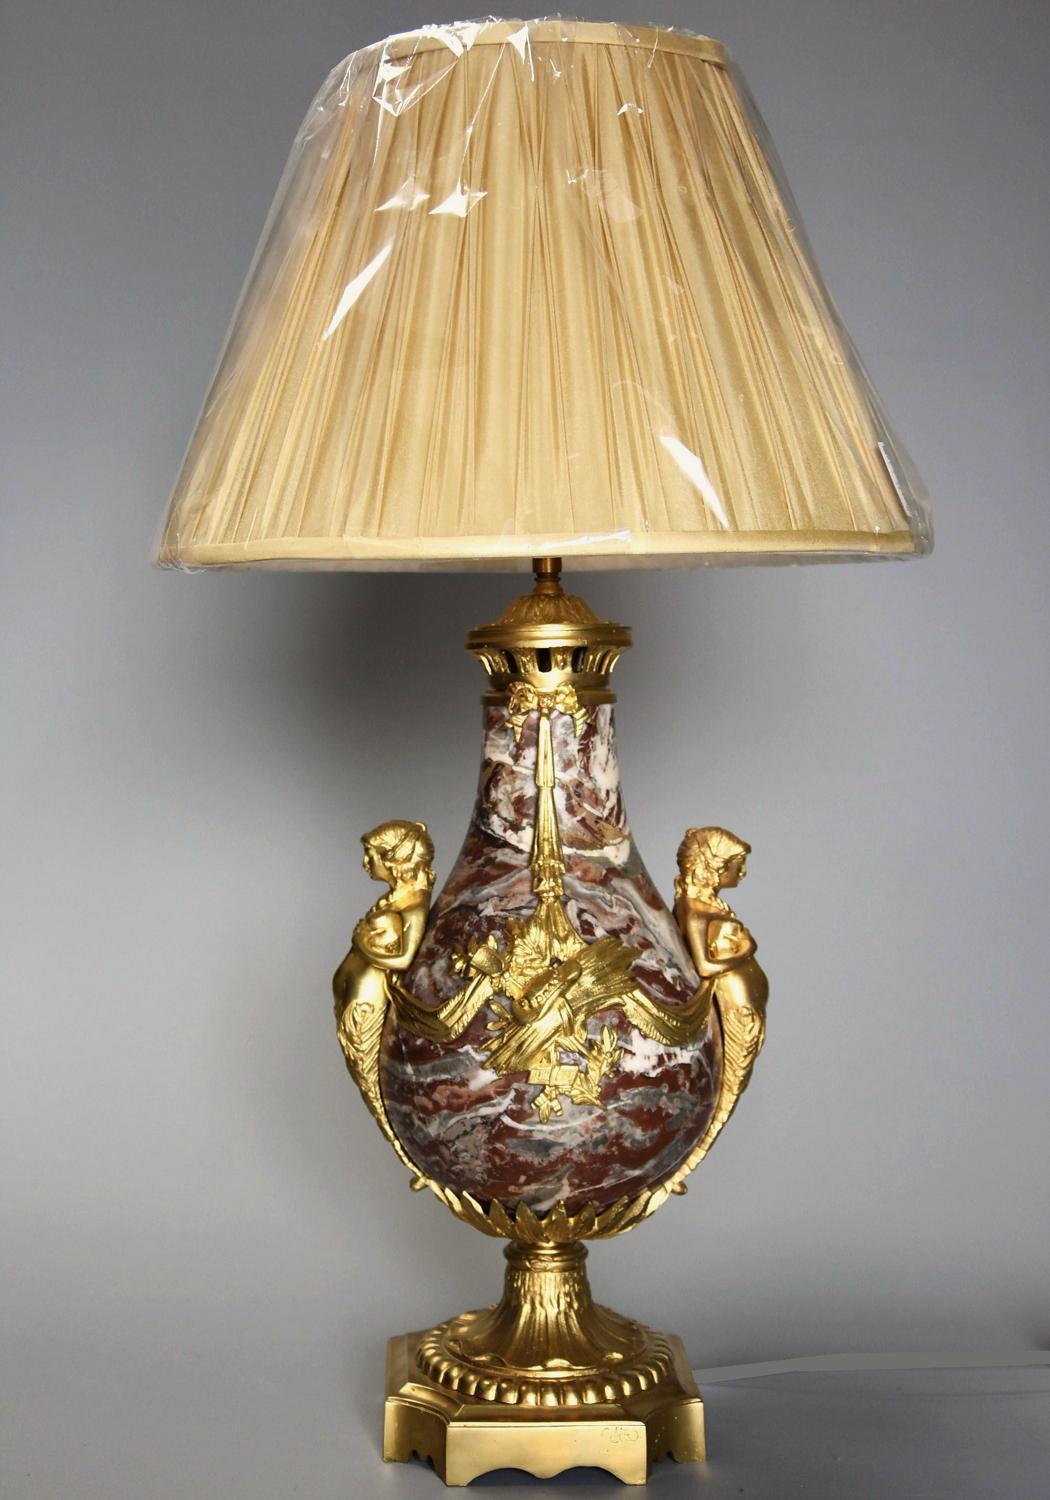 Large fine quality 19th century French marble & ormolu table lamp